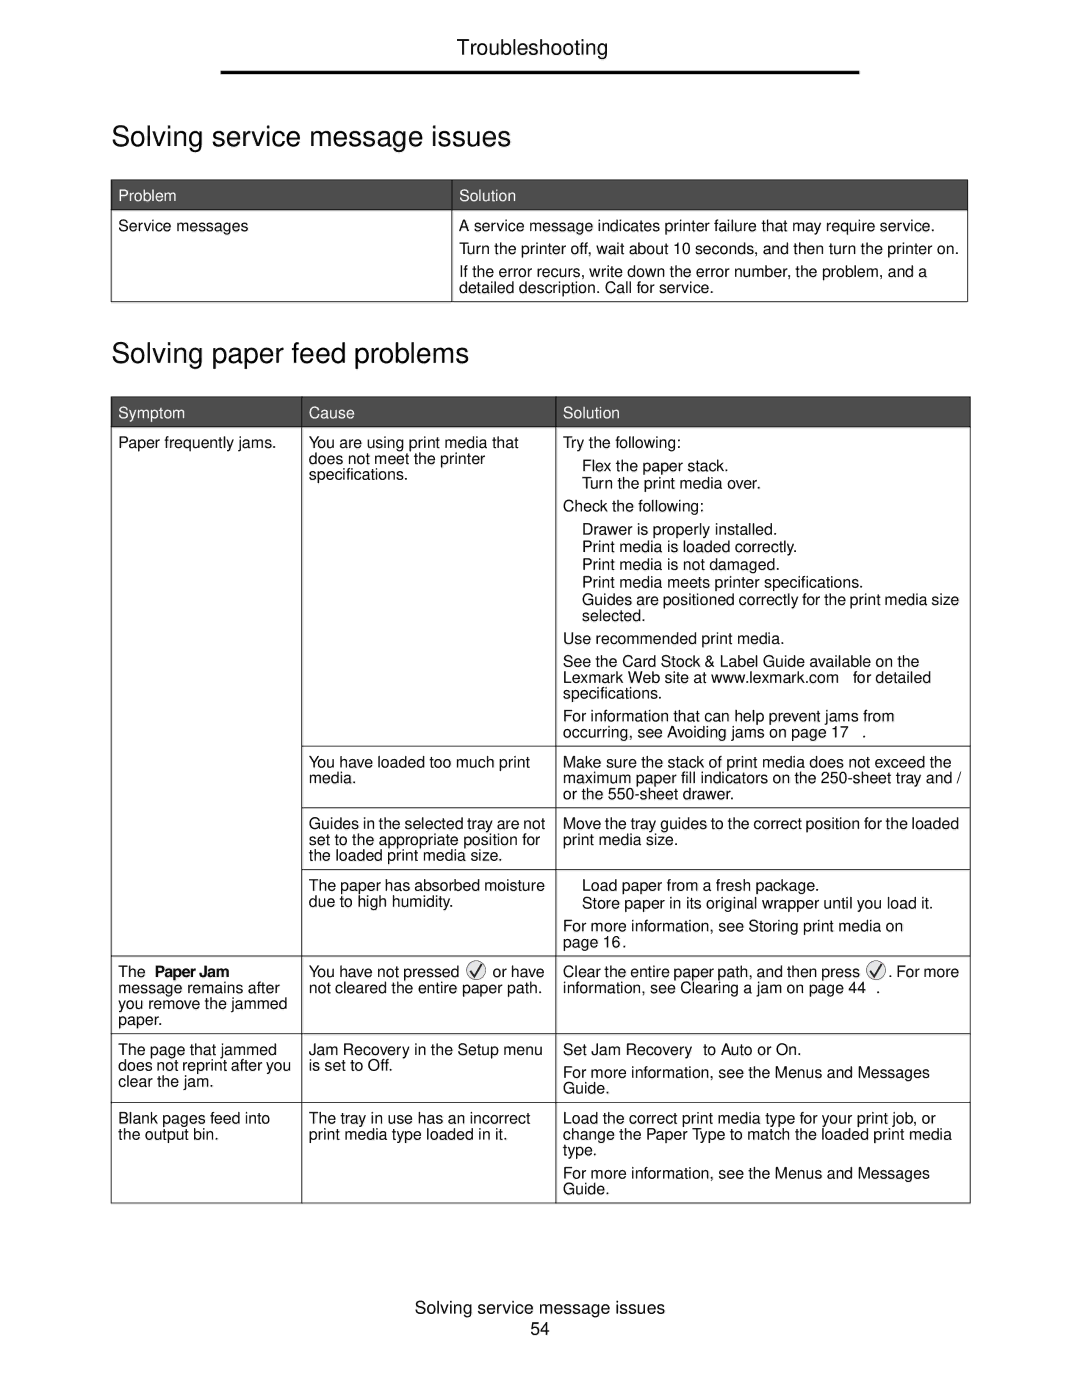 Lexmark E352DN manual Solving service message issues, Solving paper feed problems, Problem Solution 